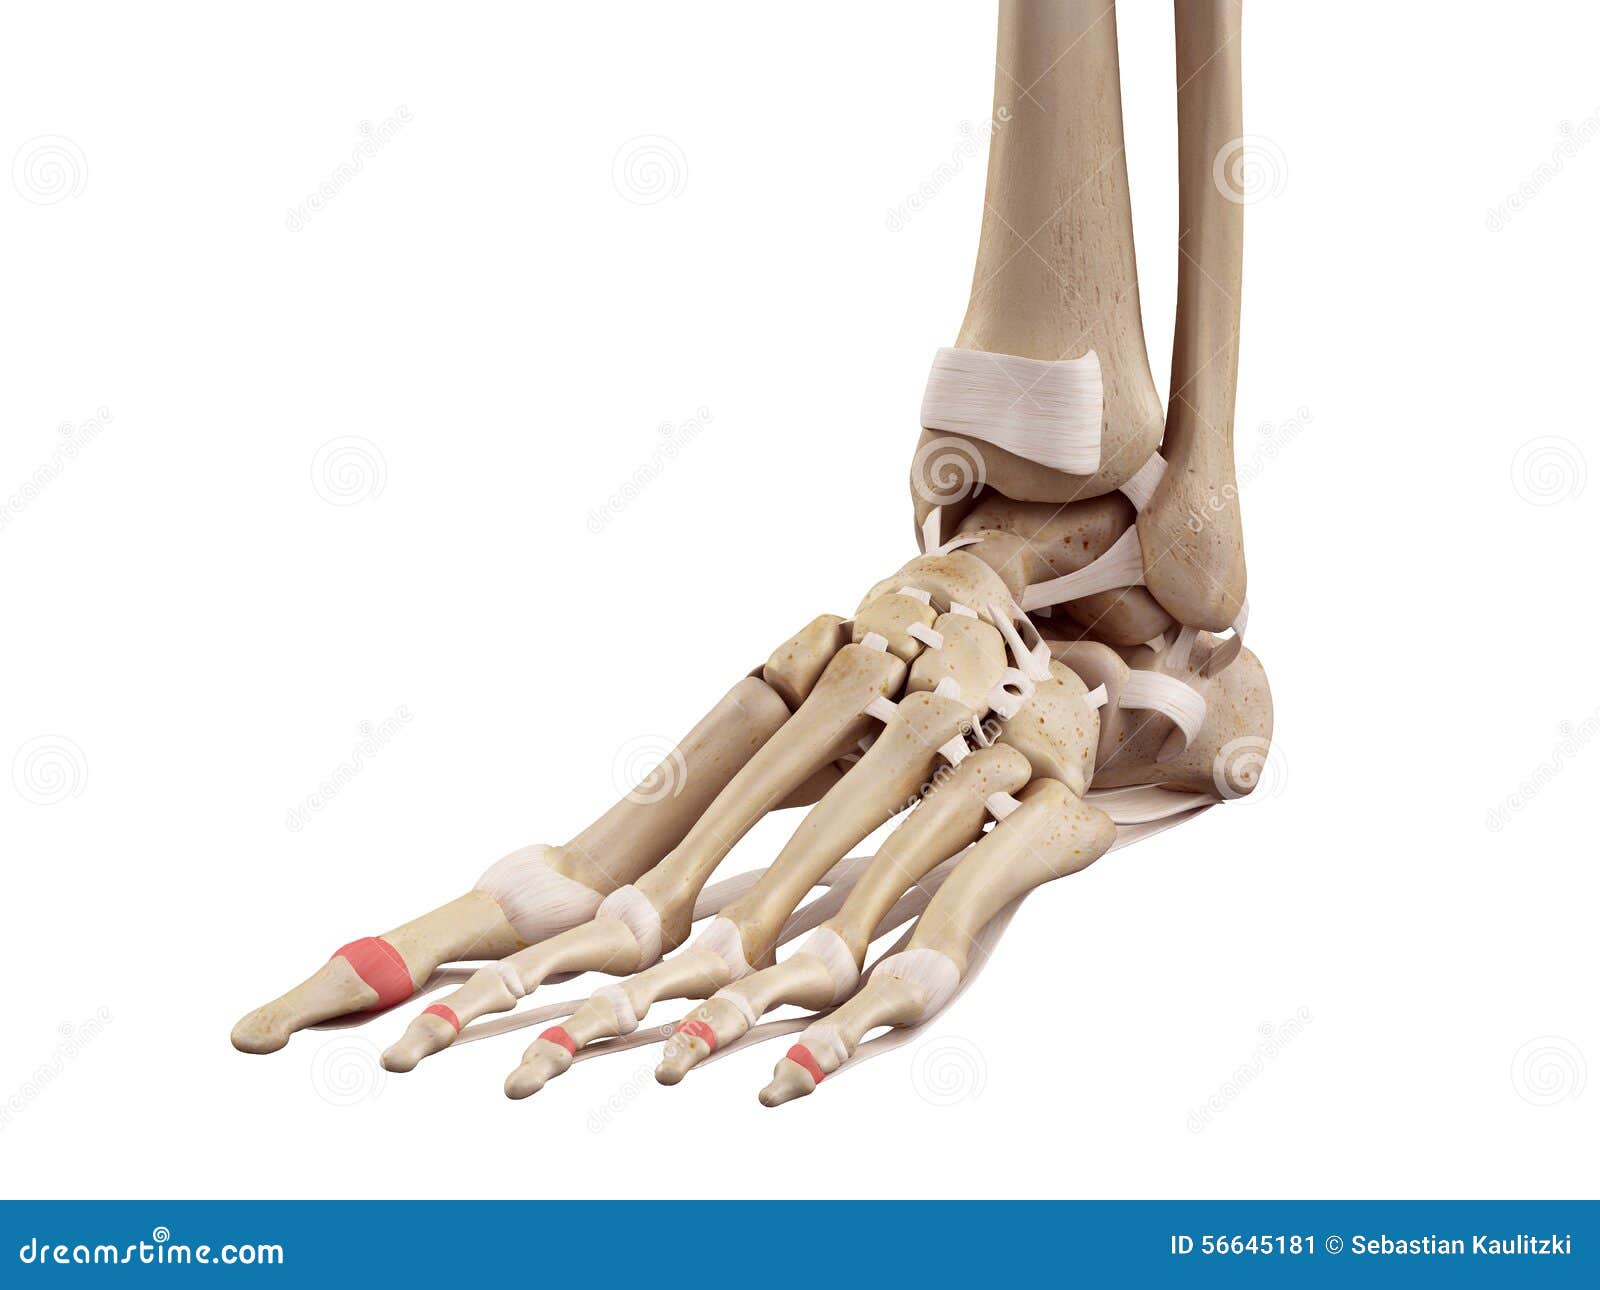 the distal joint capsules